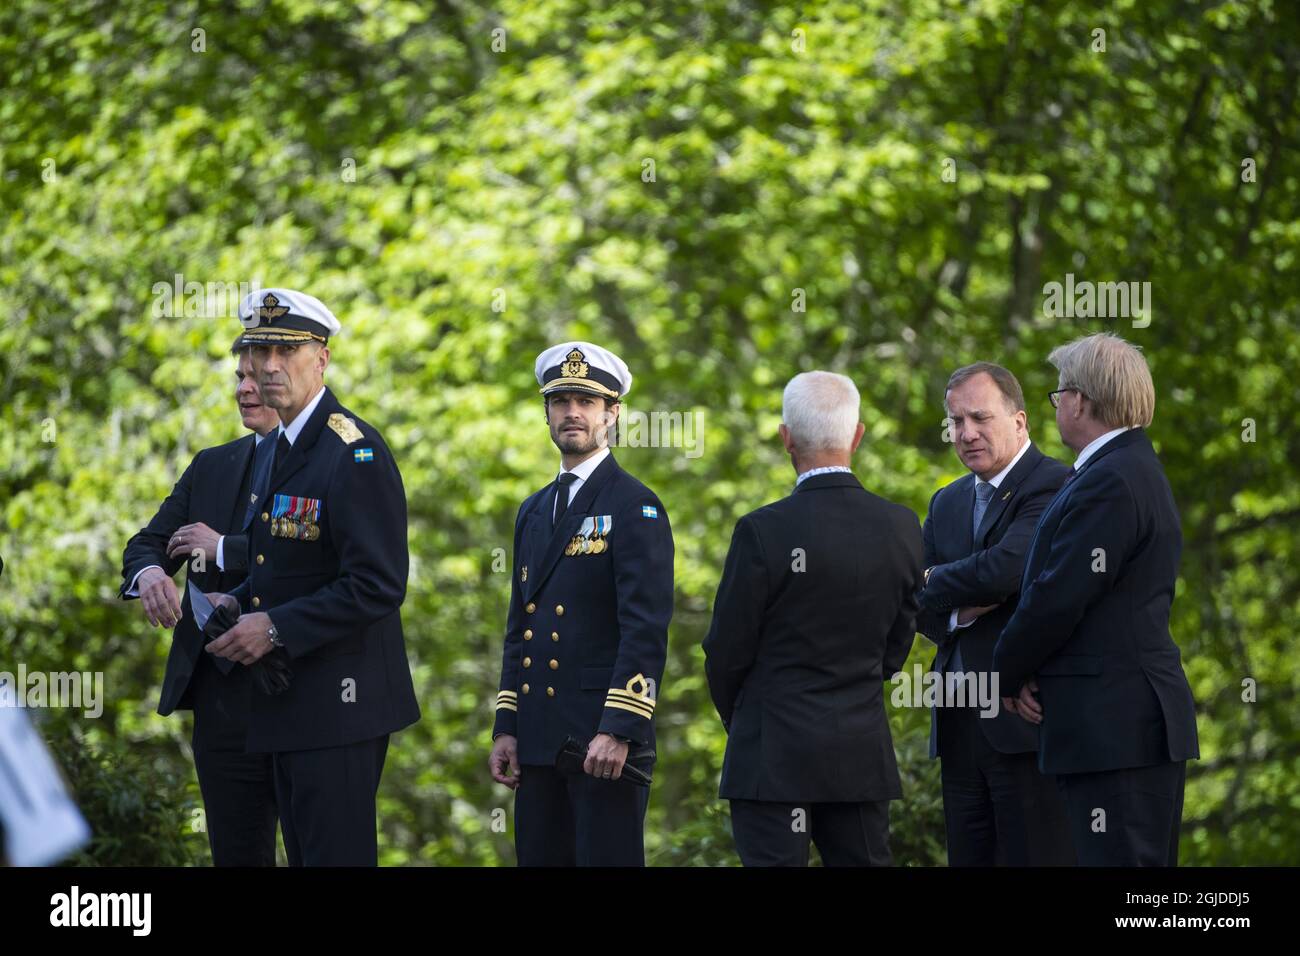 General Micael Bydén, Prince Carl Philip, Sverker Goranson, chairman of the Swedish Veterans Association, Prime Minister Stefan Lofven and Peter Hultqvist, Minister for Defence, during Sweden's Veterans Day at the Kungsangen regiment in Stockholm, Sweden, May 29, 2020. Photo: Pontus Lundahl / TT / code 10050  Stock Photo